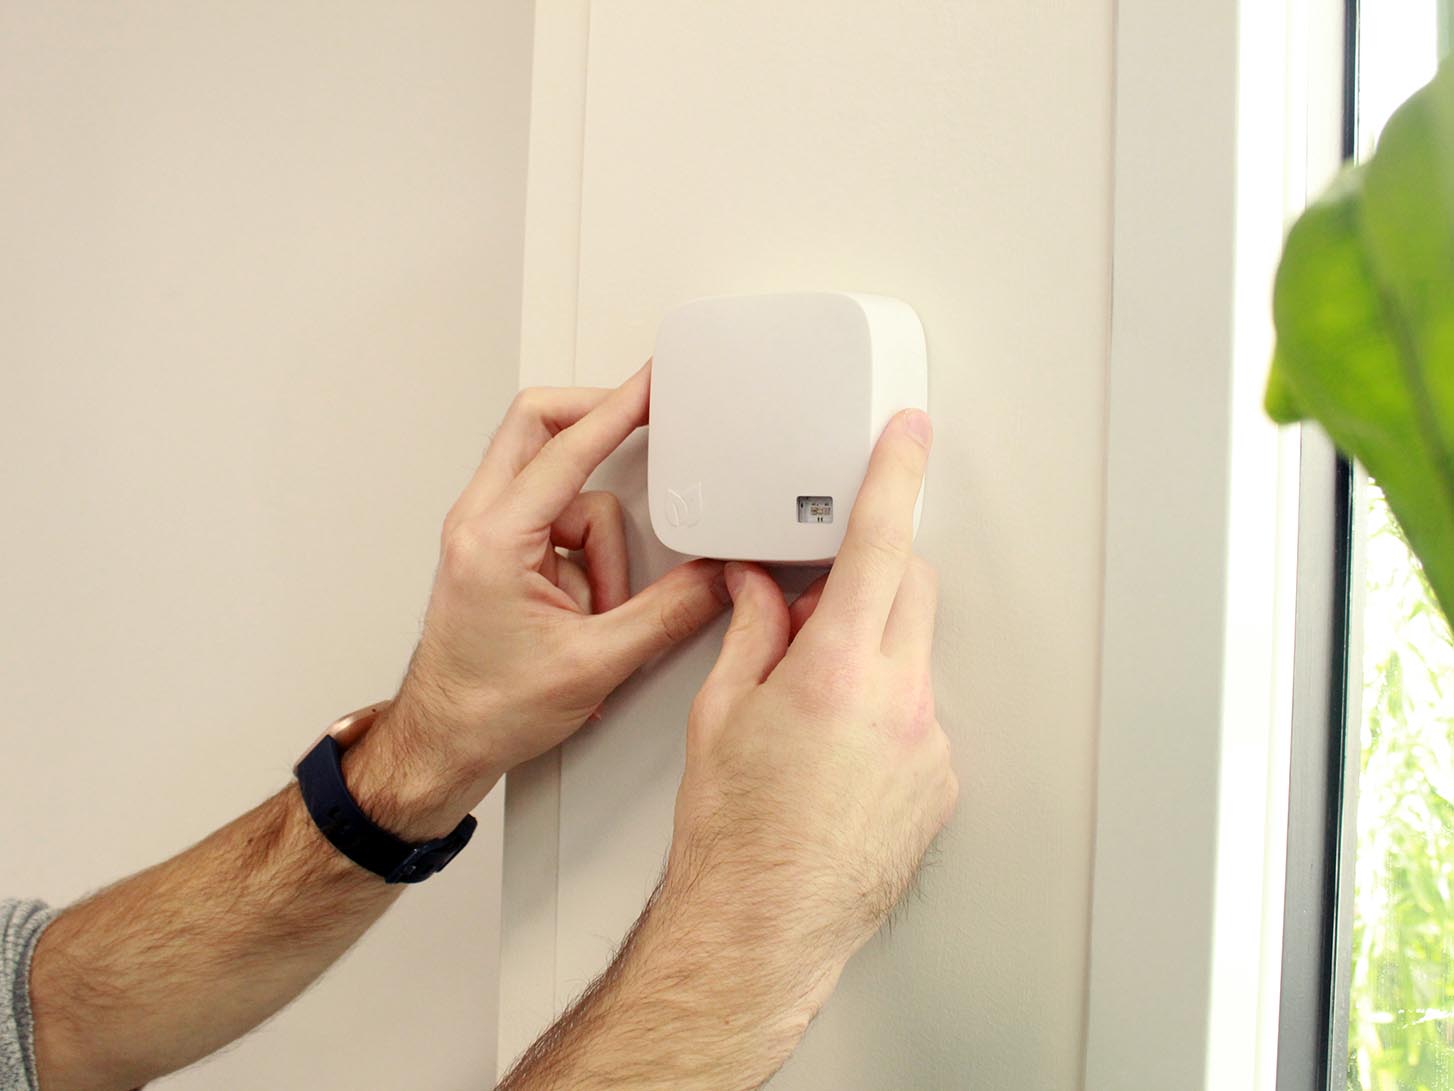 Thumbnail of An AirSuite sensor being mounted on a wall